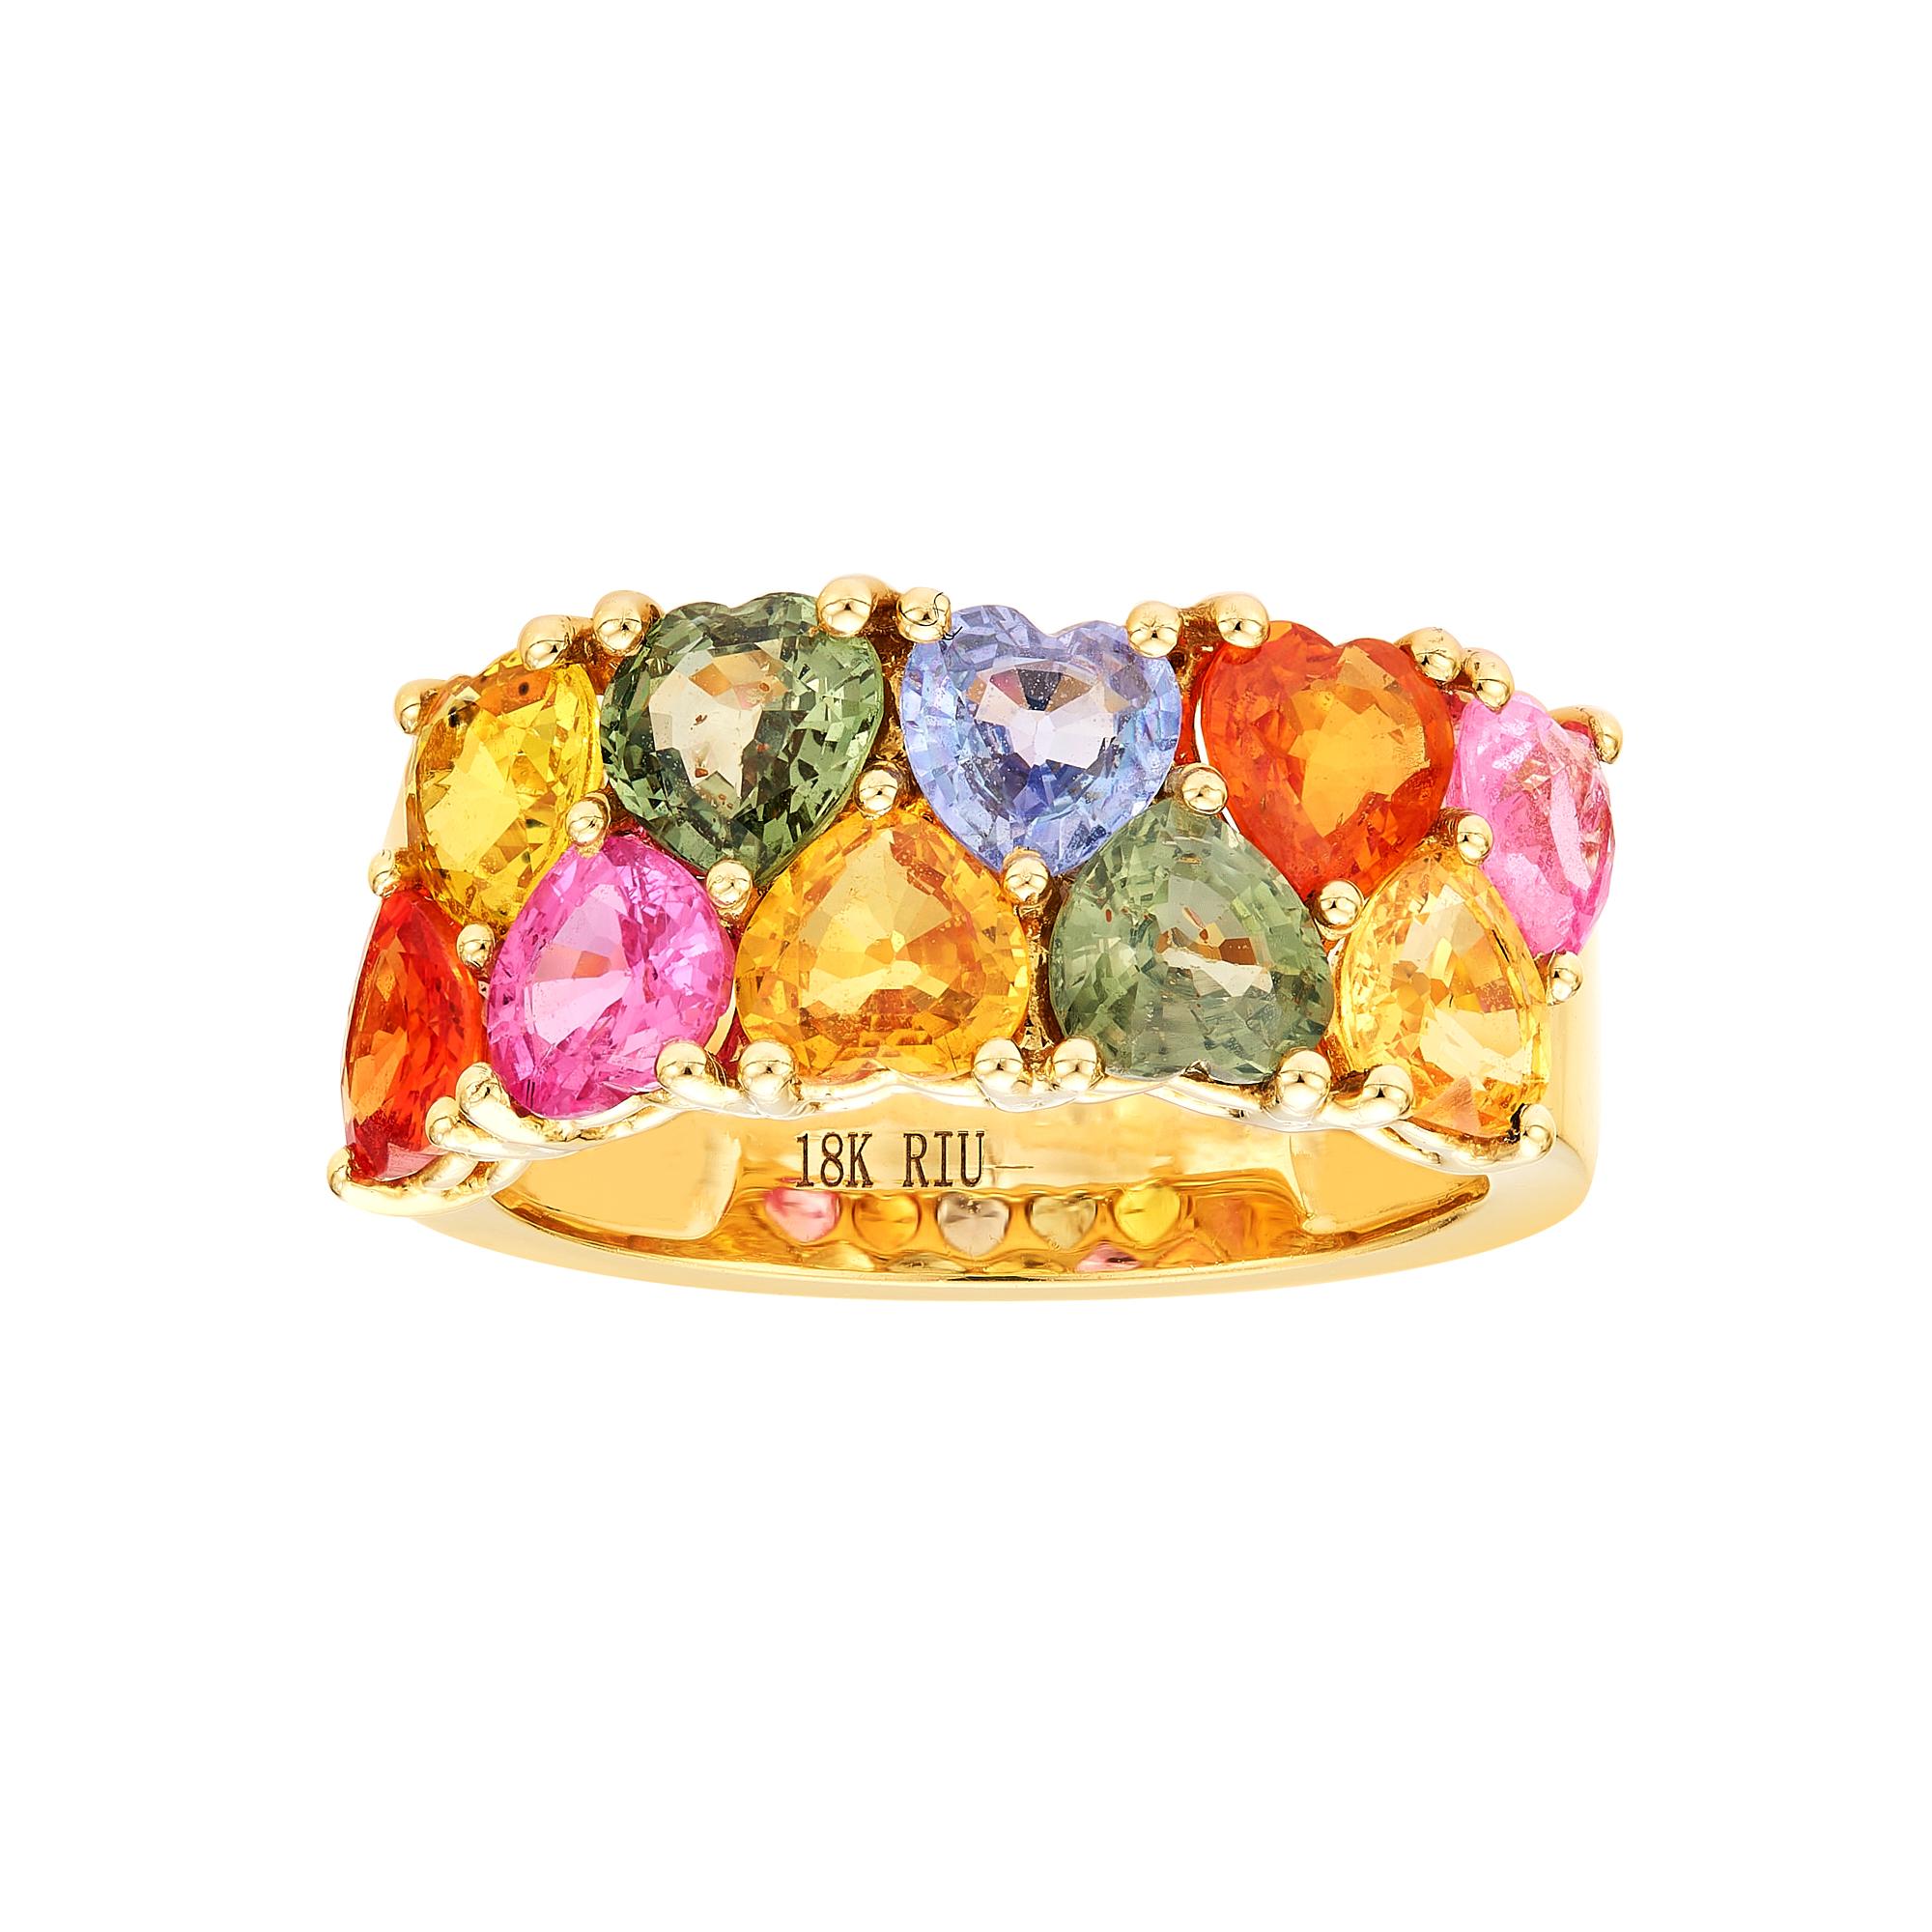 18K Yellow Gold
Multi Sapphire: 5.36ct total weight